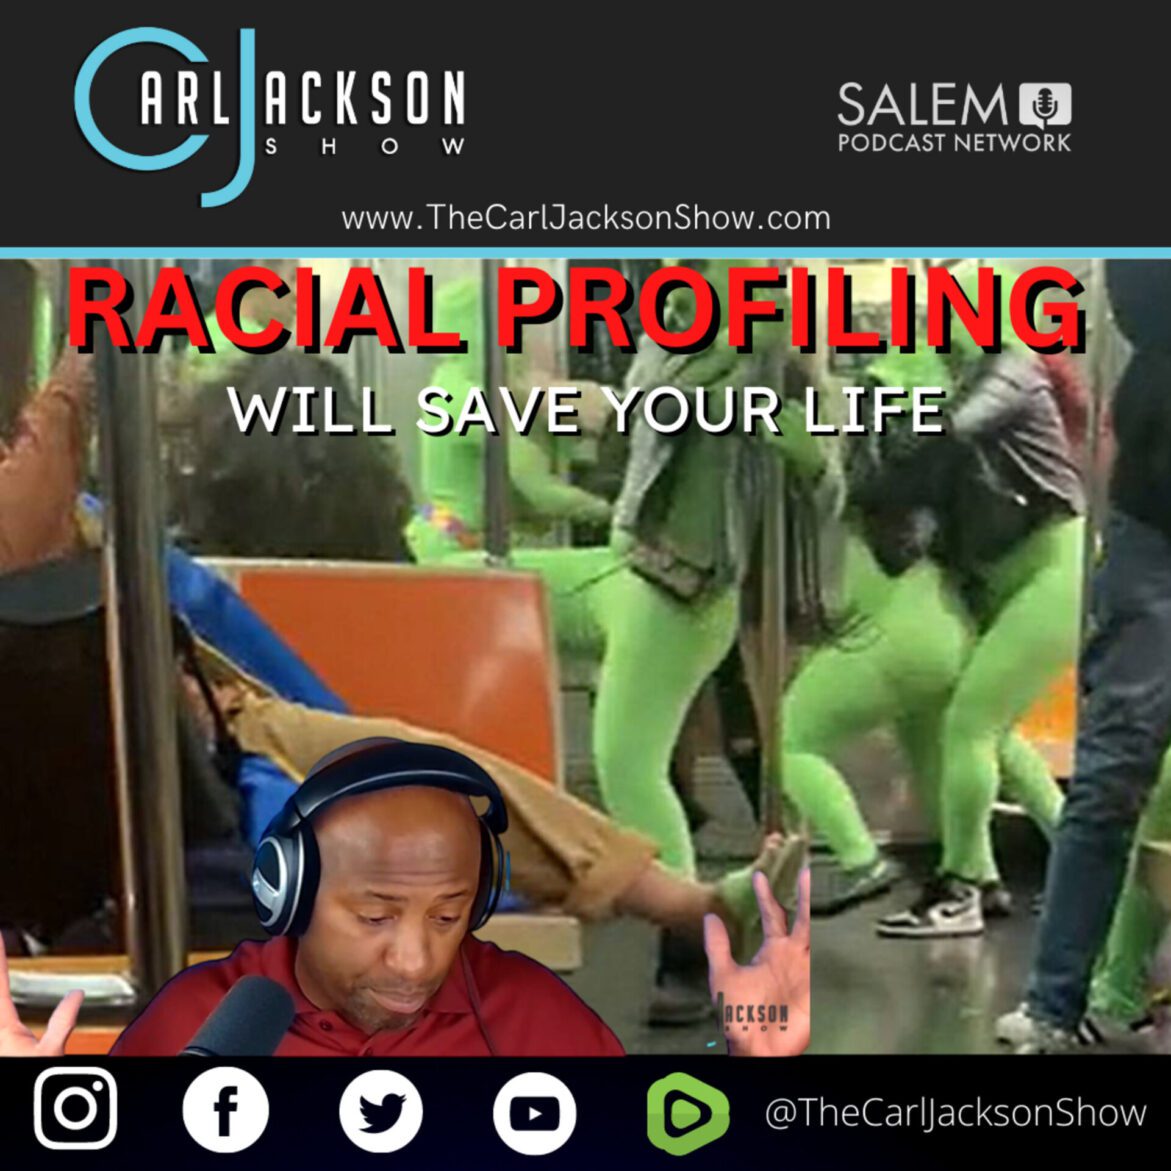 Black Podcasting - RACIAL PROFILING WILL save your life